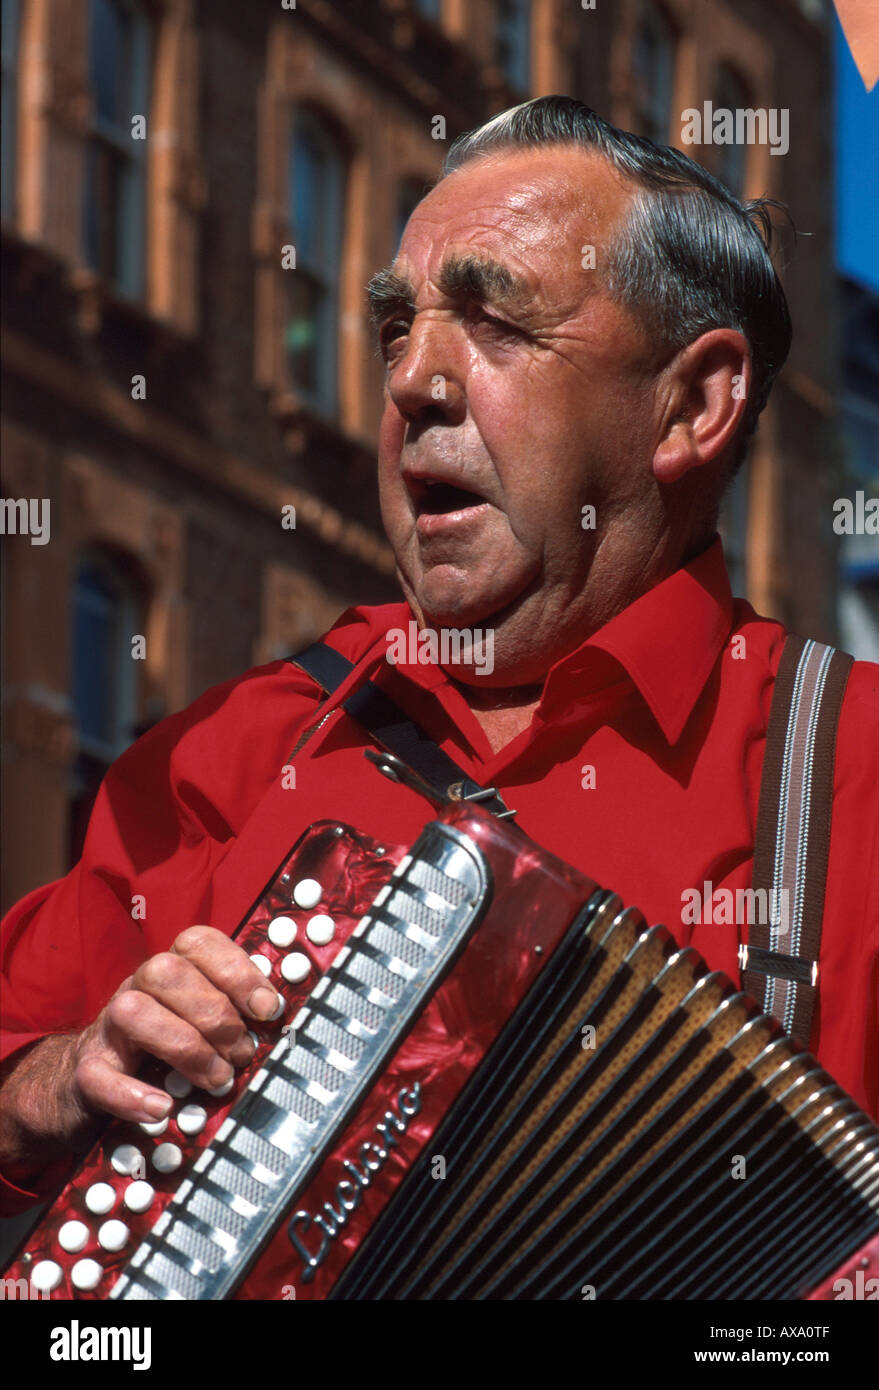 Old musician with accordion, St. <b>Peter Port</b>, Guernsey, Channel Islands, UK - old-musician-with-accordion-st-peter-port-guernsey-channel-islands-AXA0TF